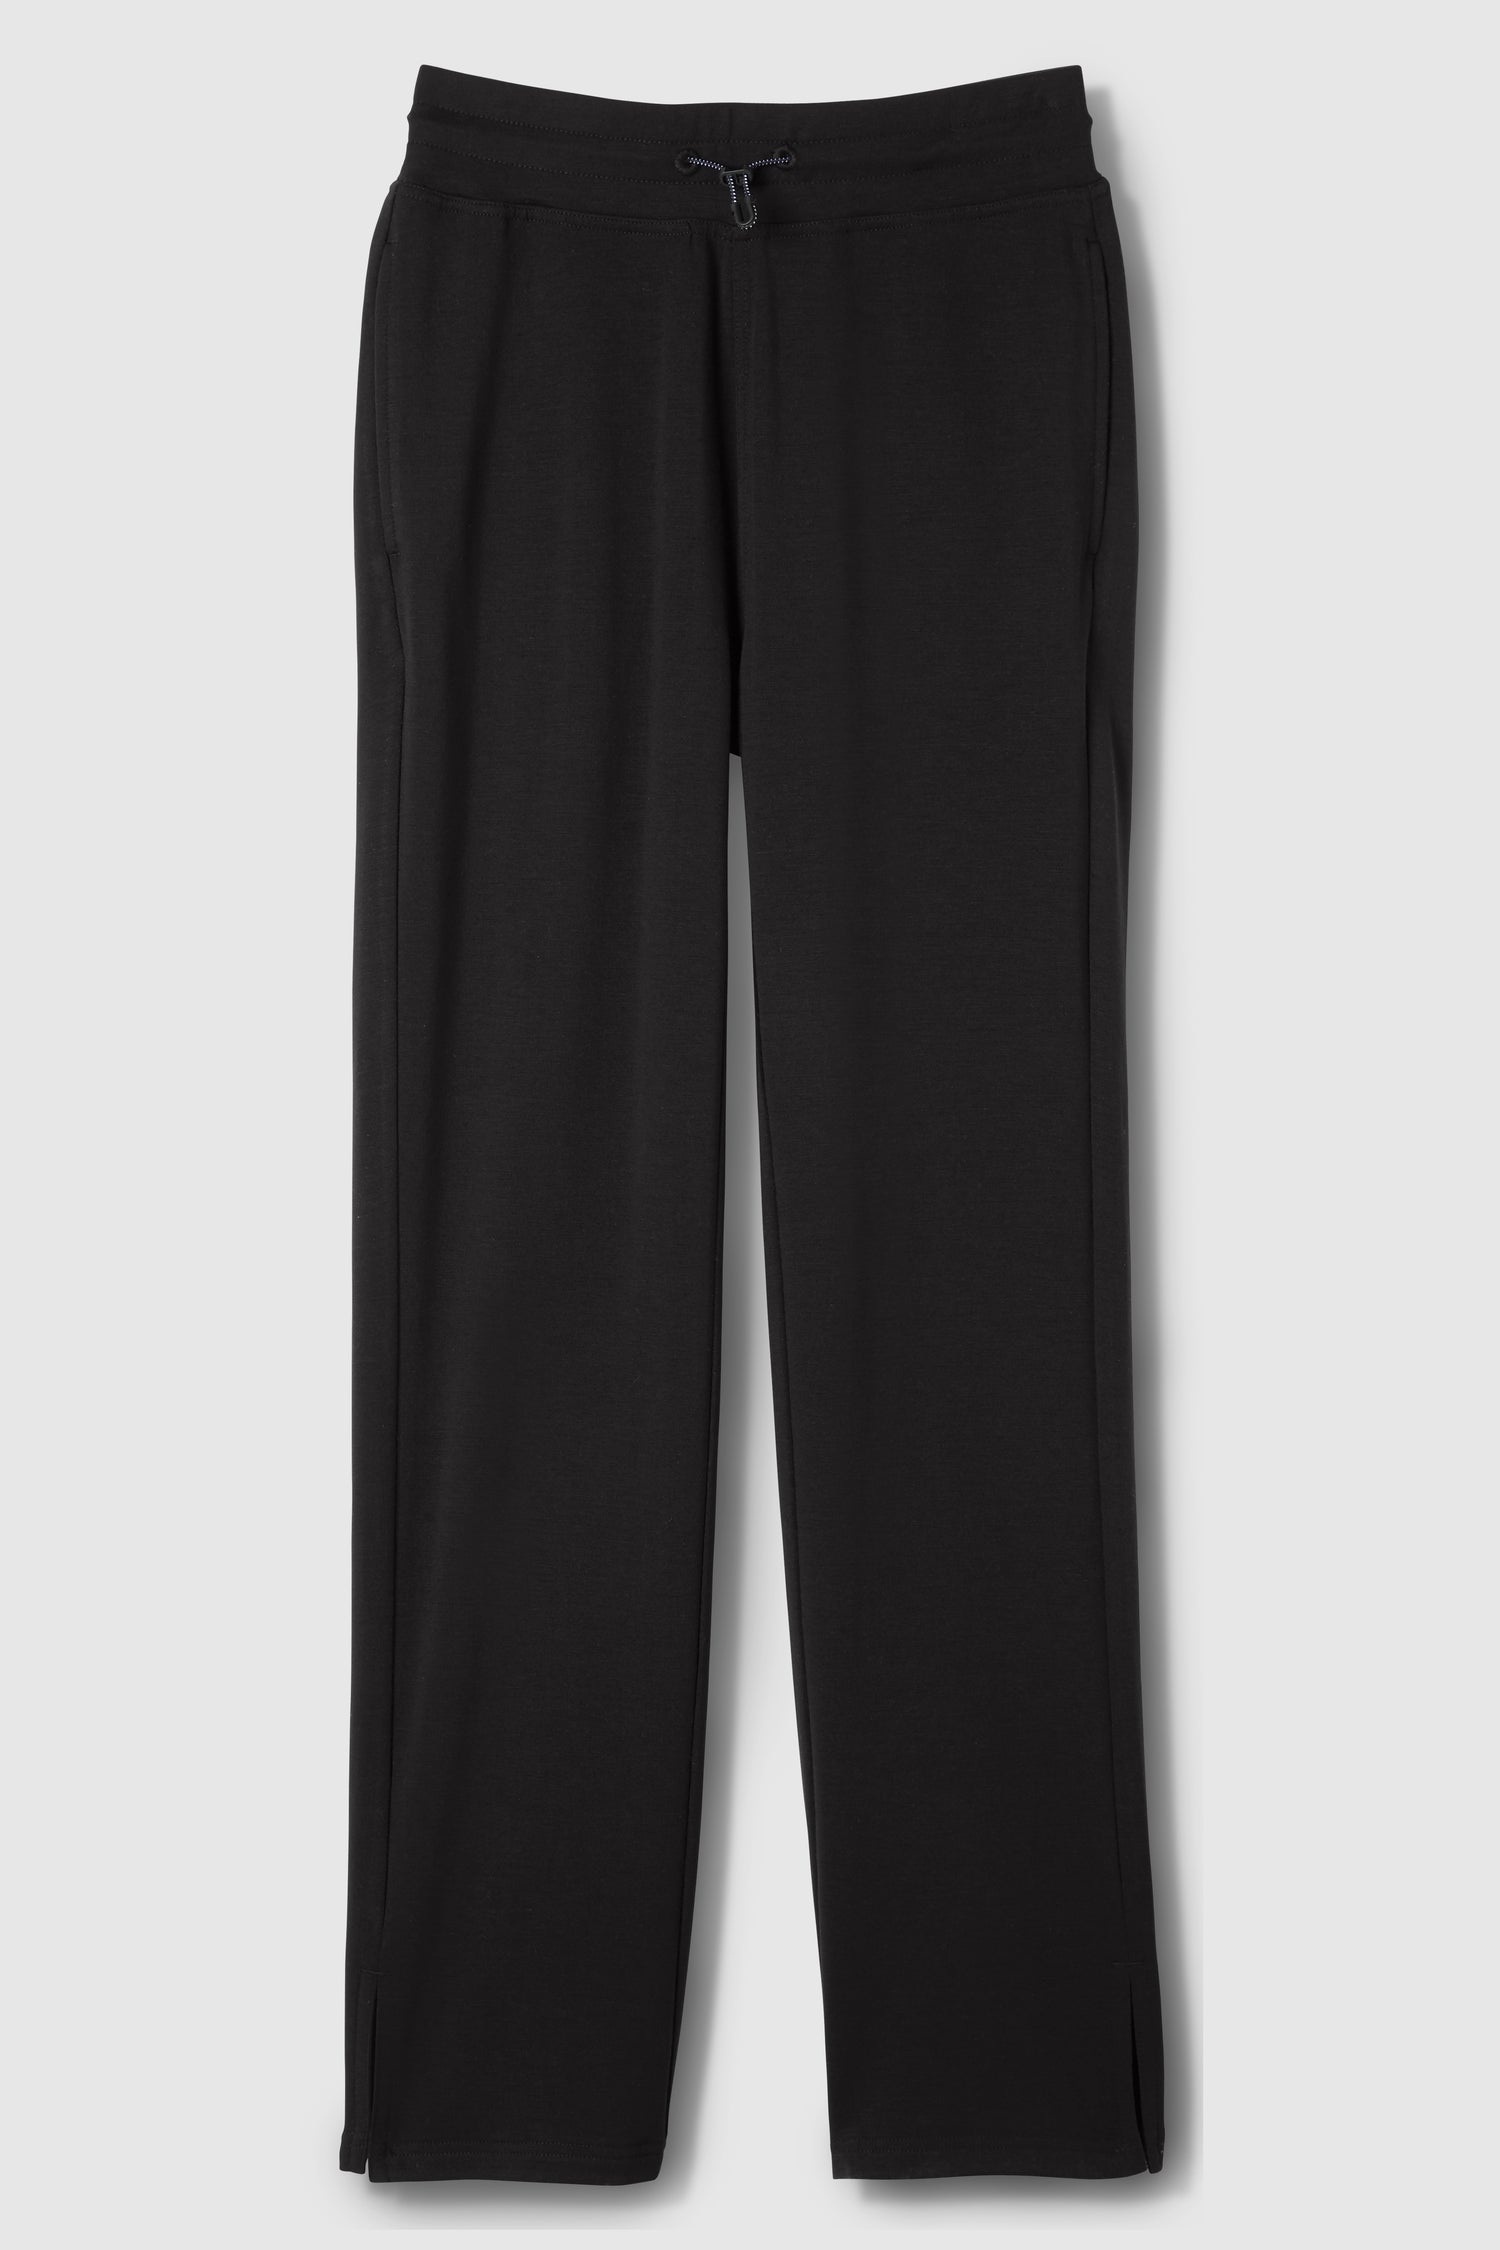 Free FWD Women's Cropped Wide Leg Pant - BEST SELLING